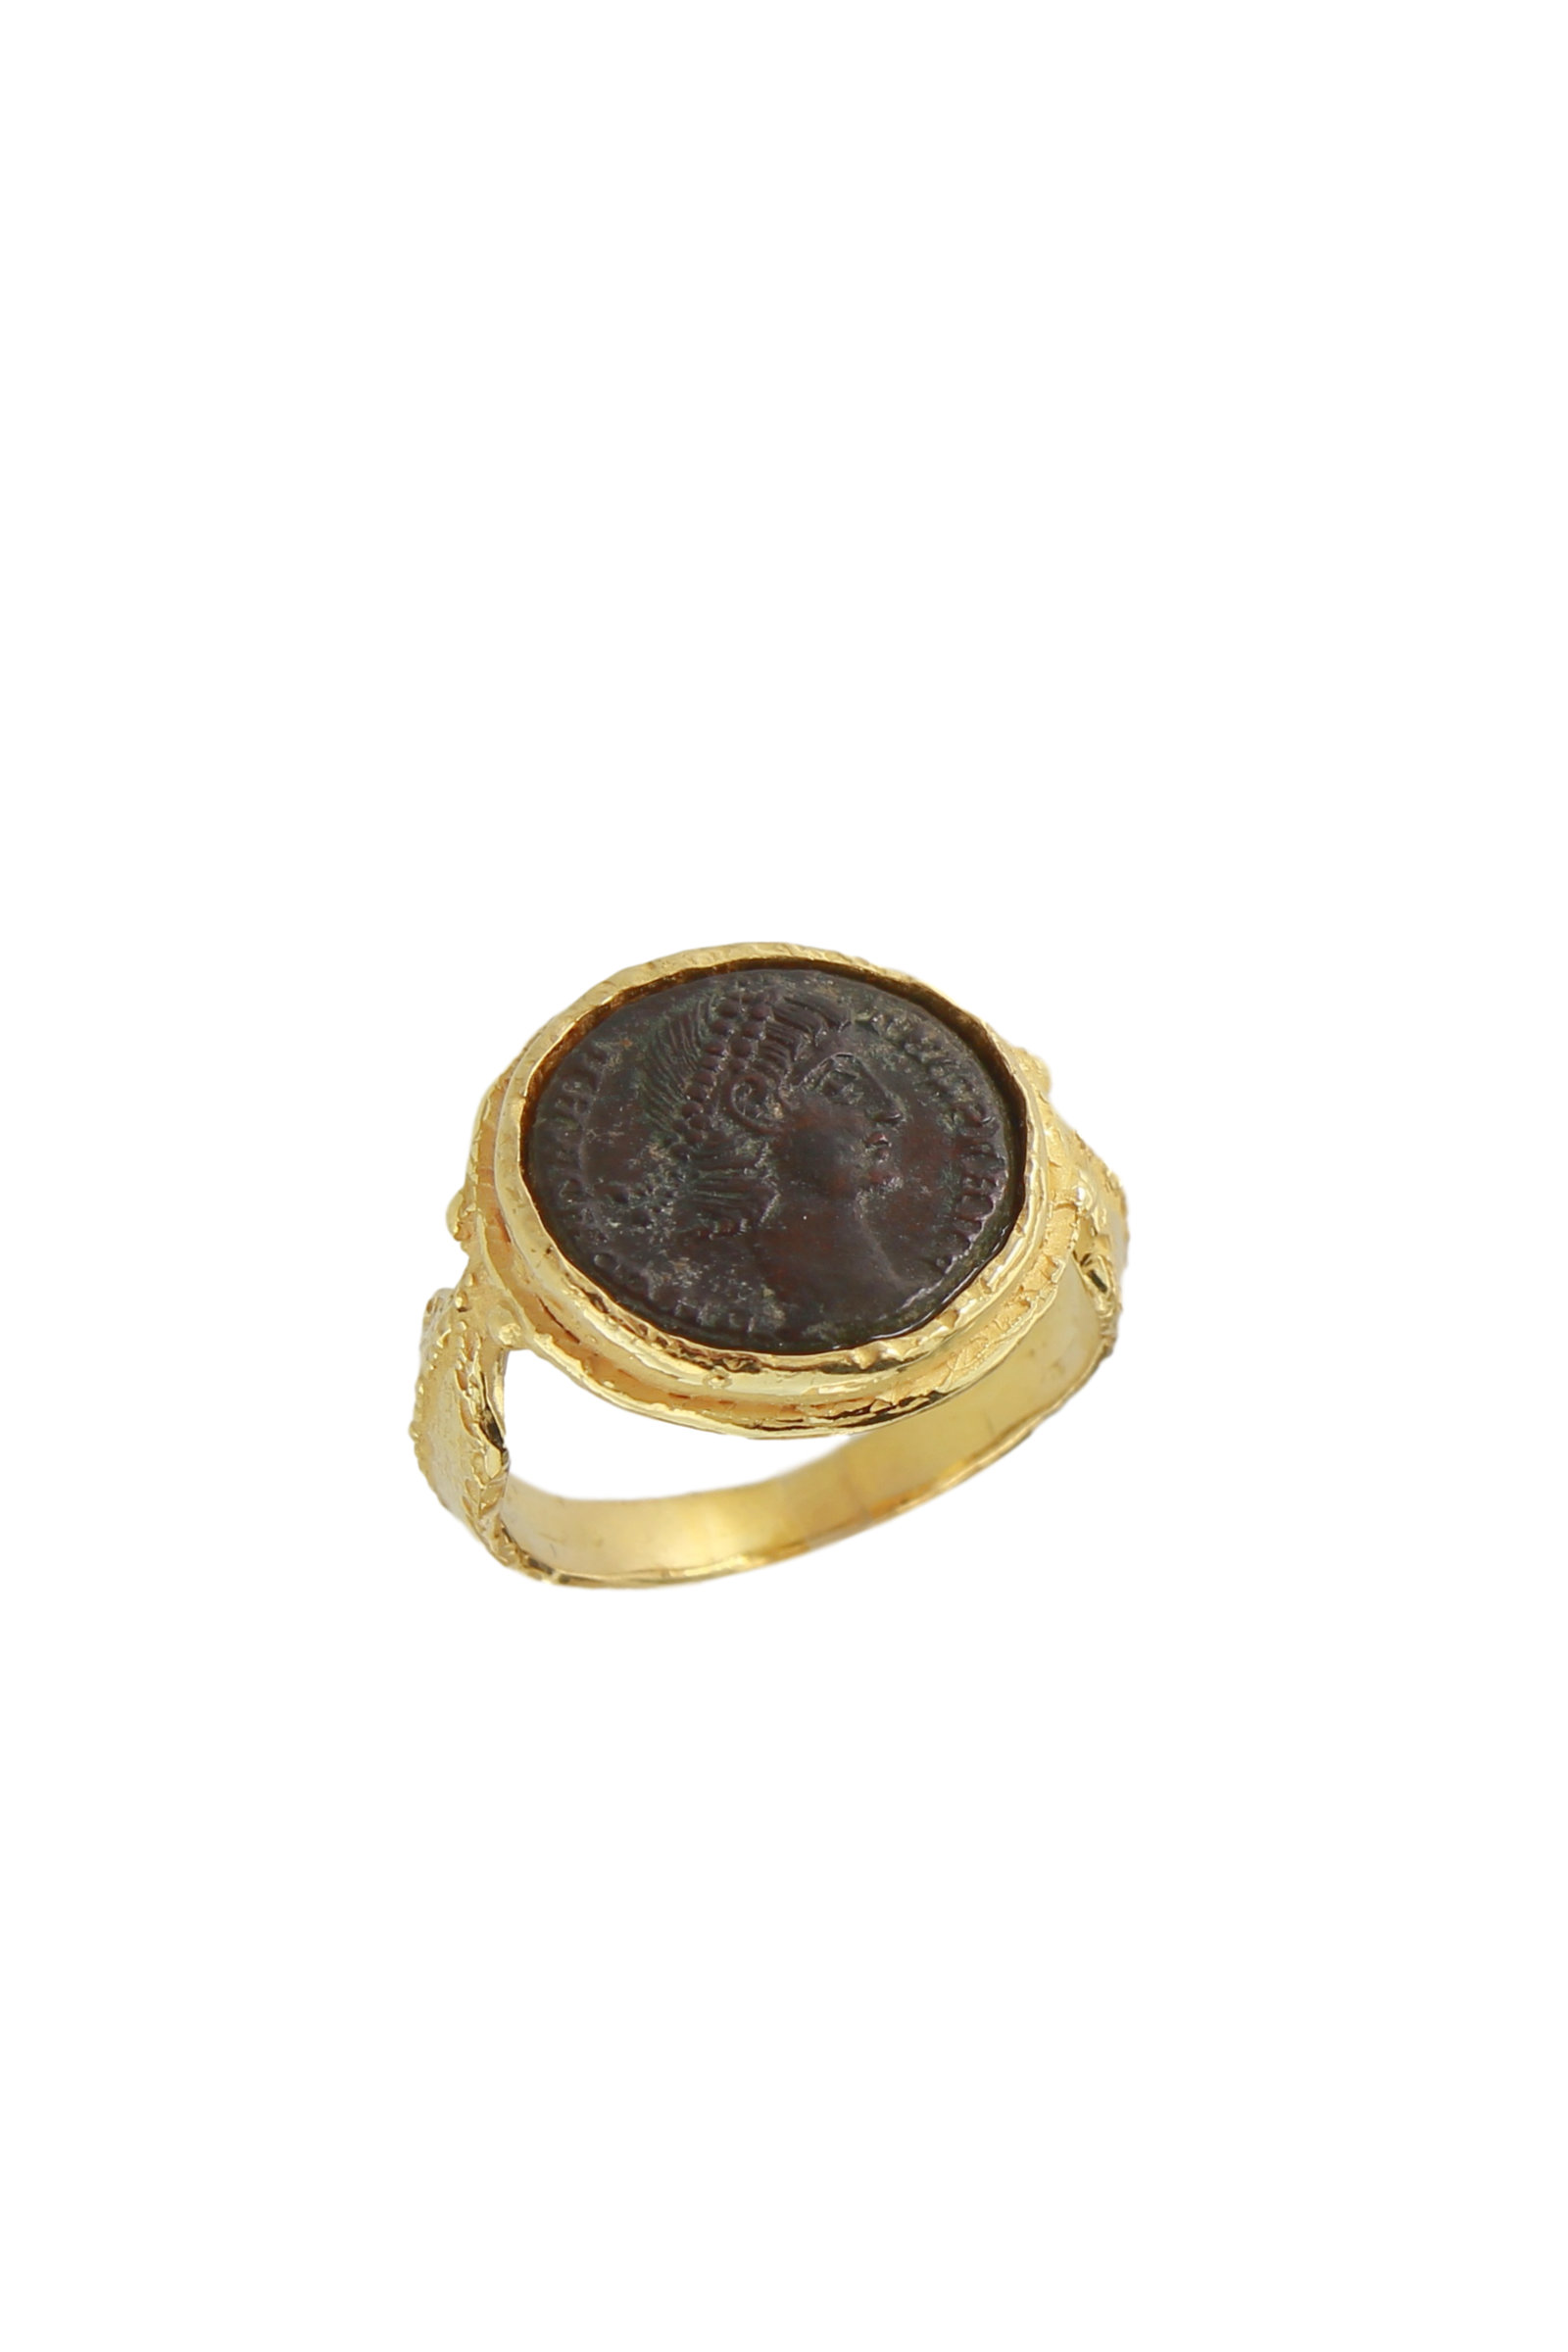 SE654A-18-Kt-Yellow-Gold-Ring-with-Roman-Coin-1